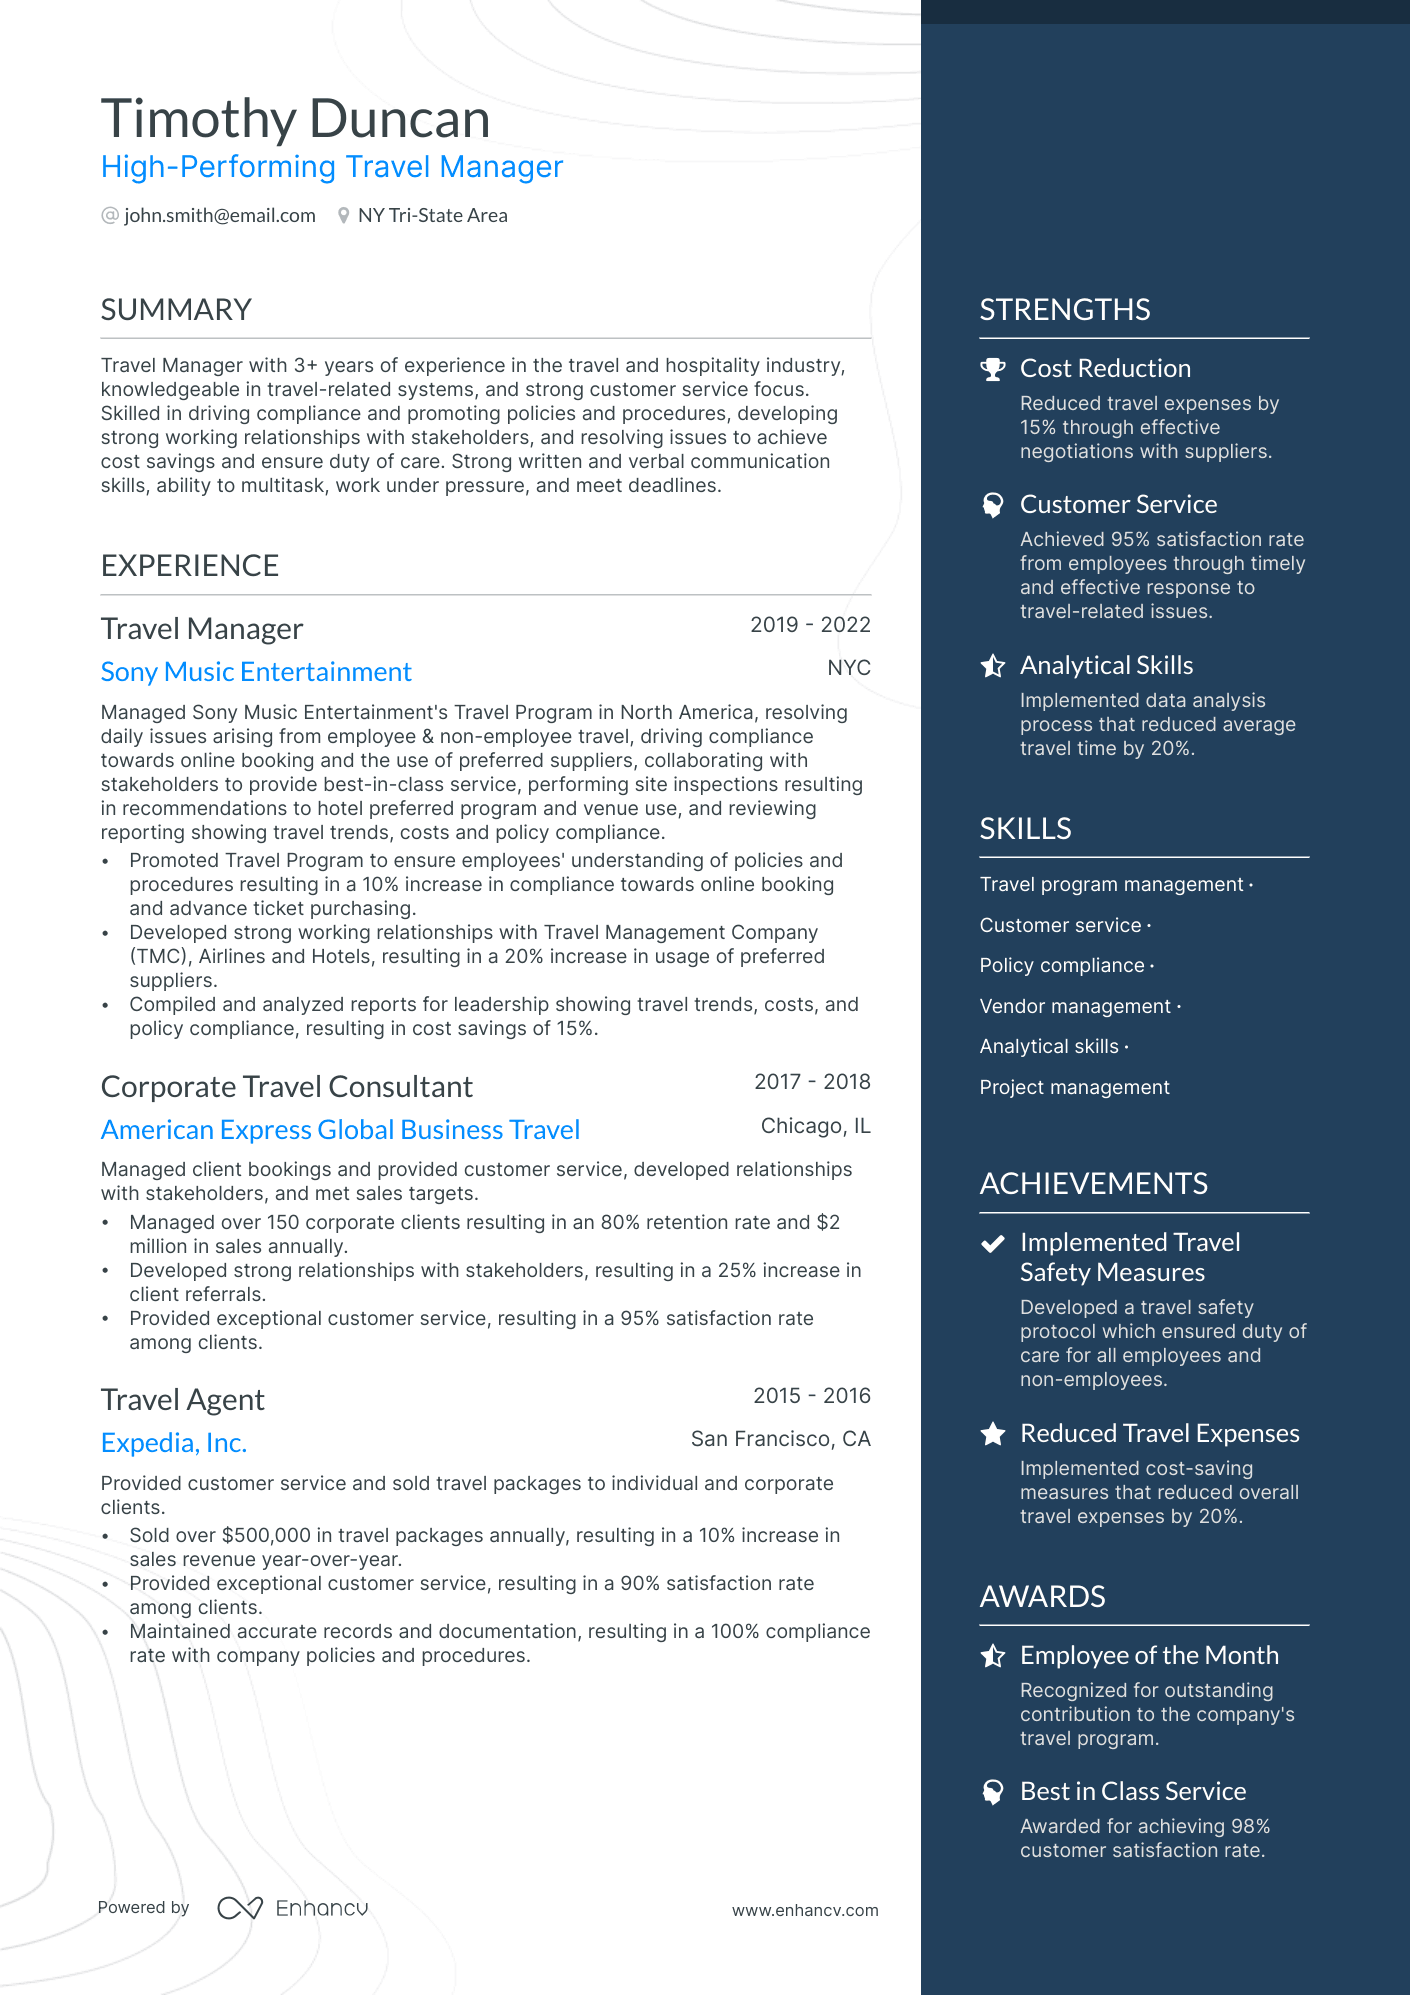 Travel Manager resume example